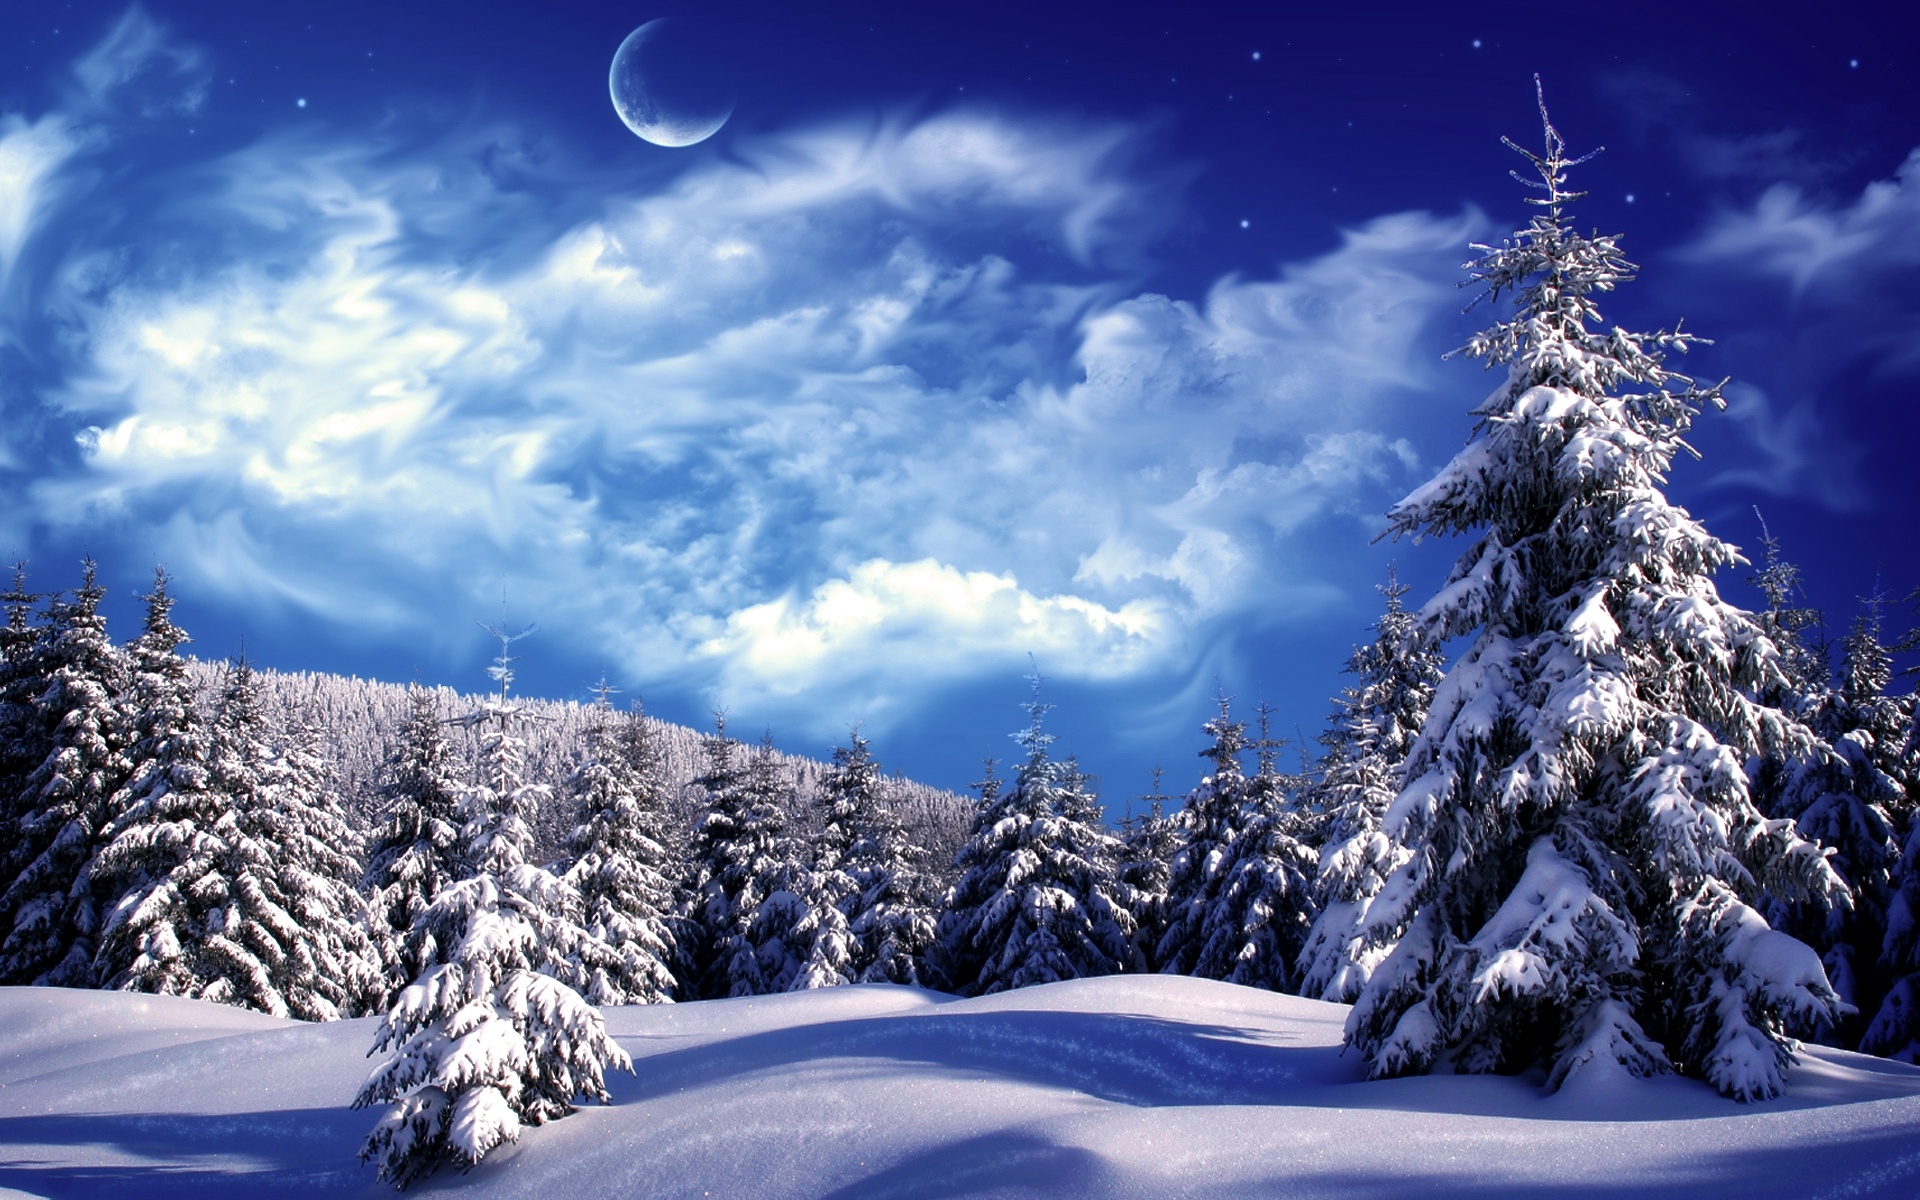 Winter Background Wallpapers | WIN10 THEMES